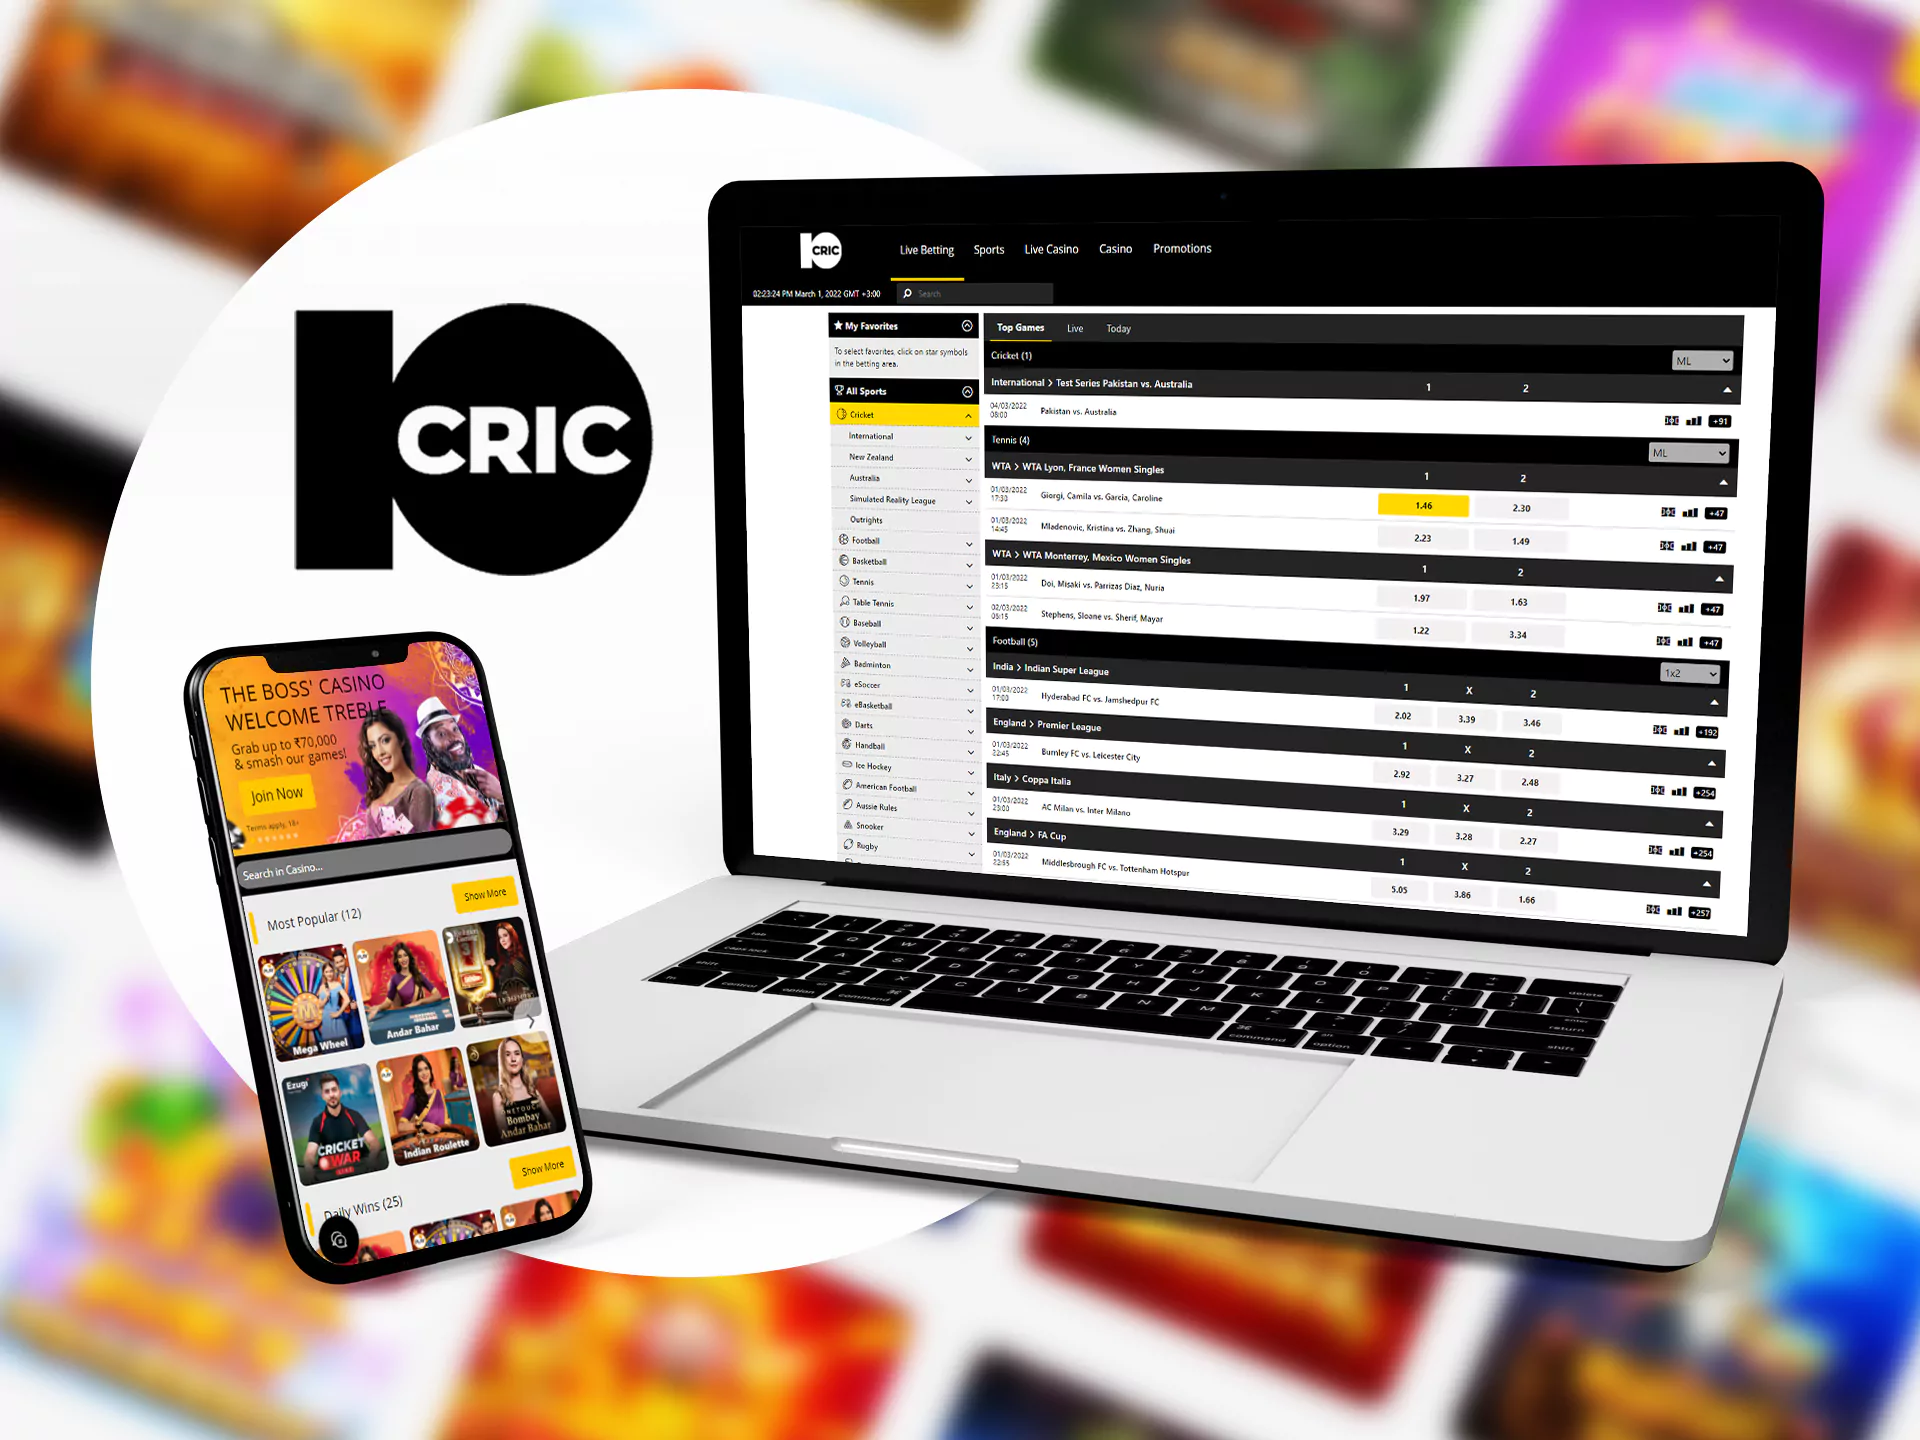 Information about 10cric promotions.